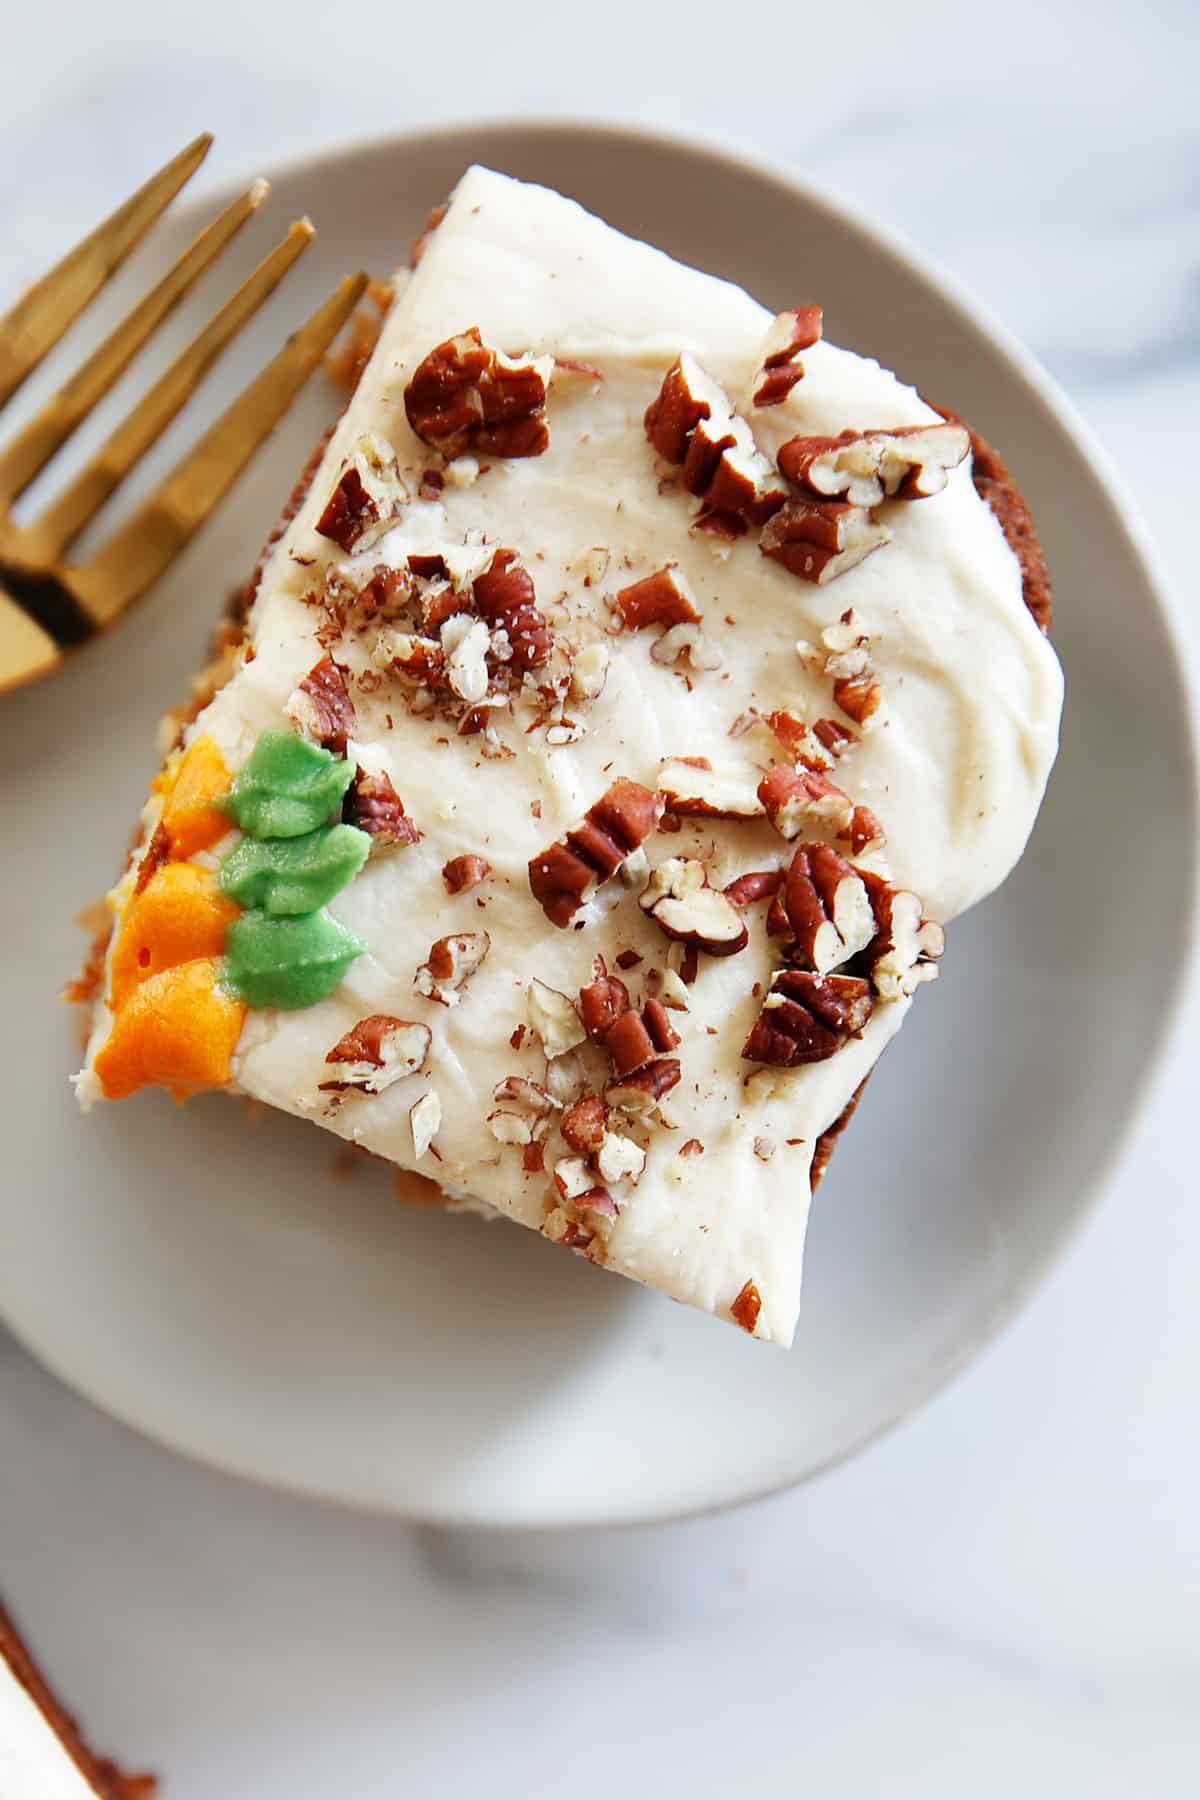 Does carrot cake contain gluten